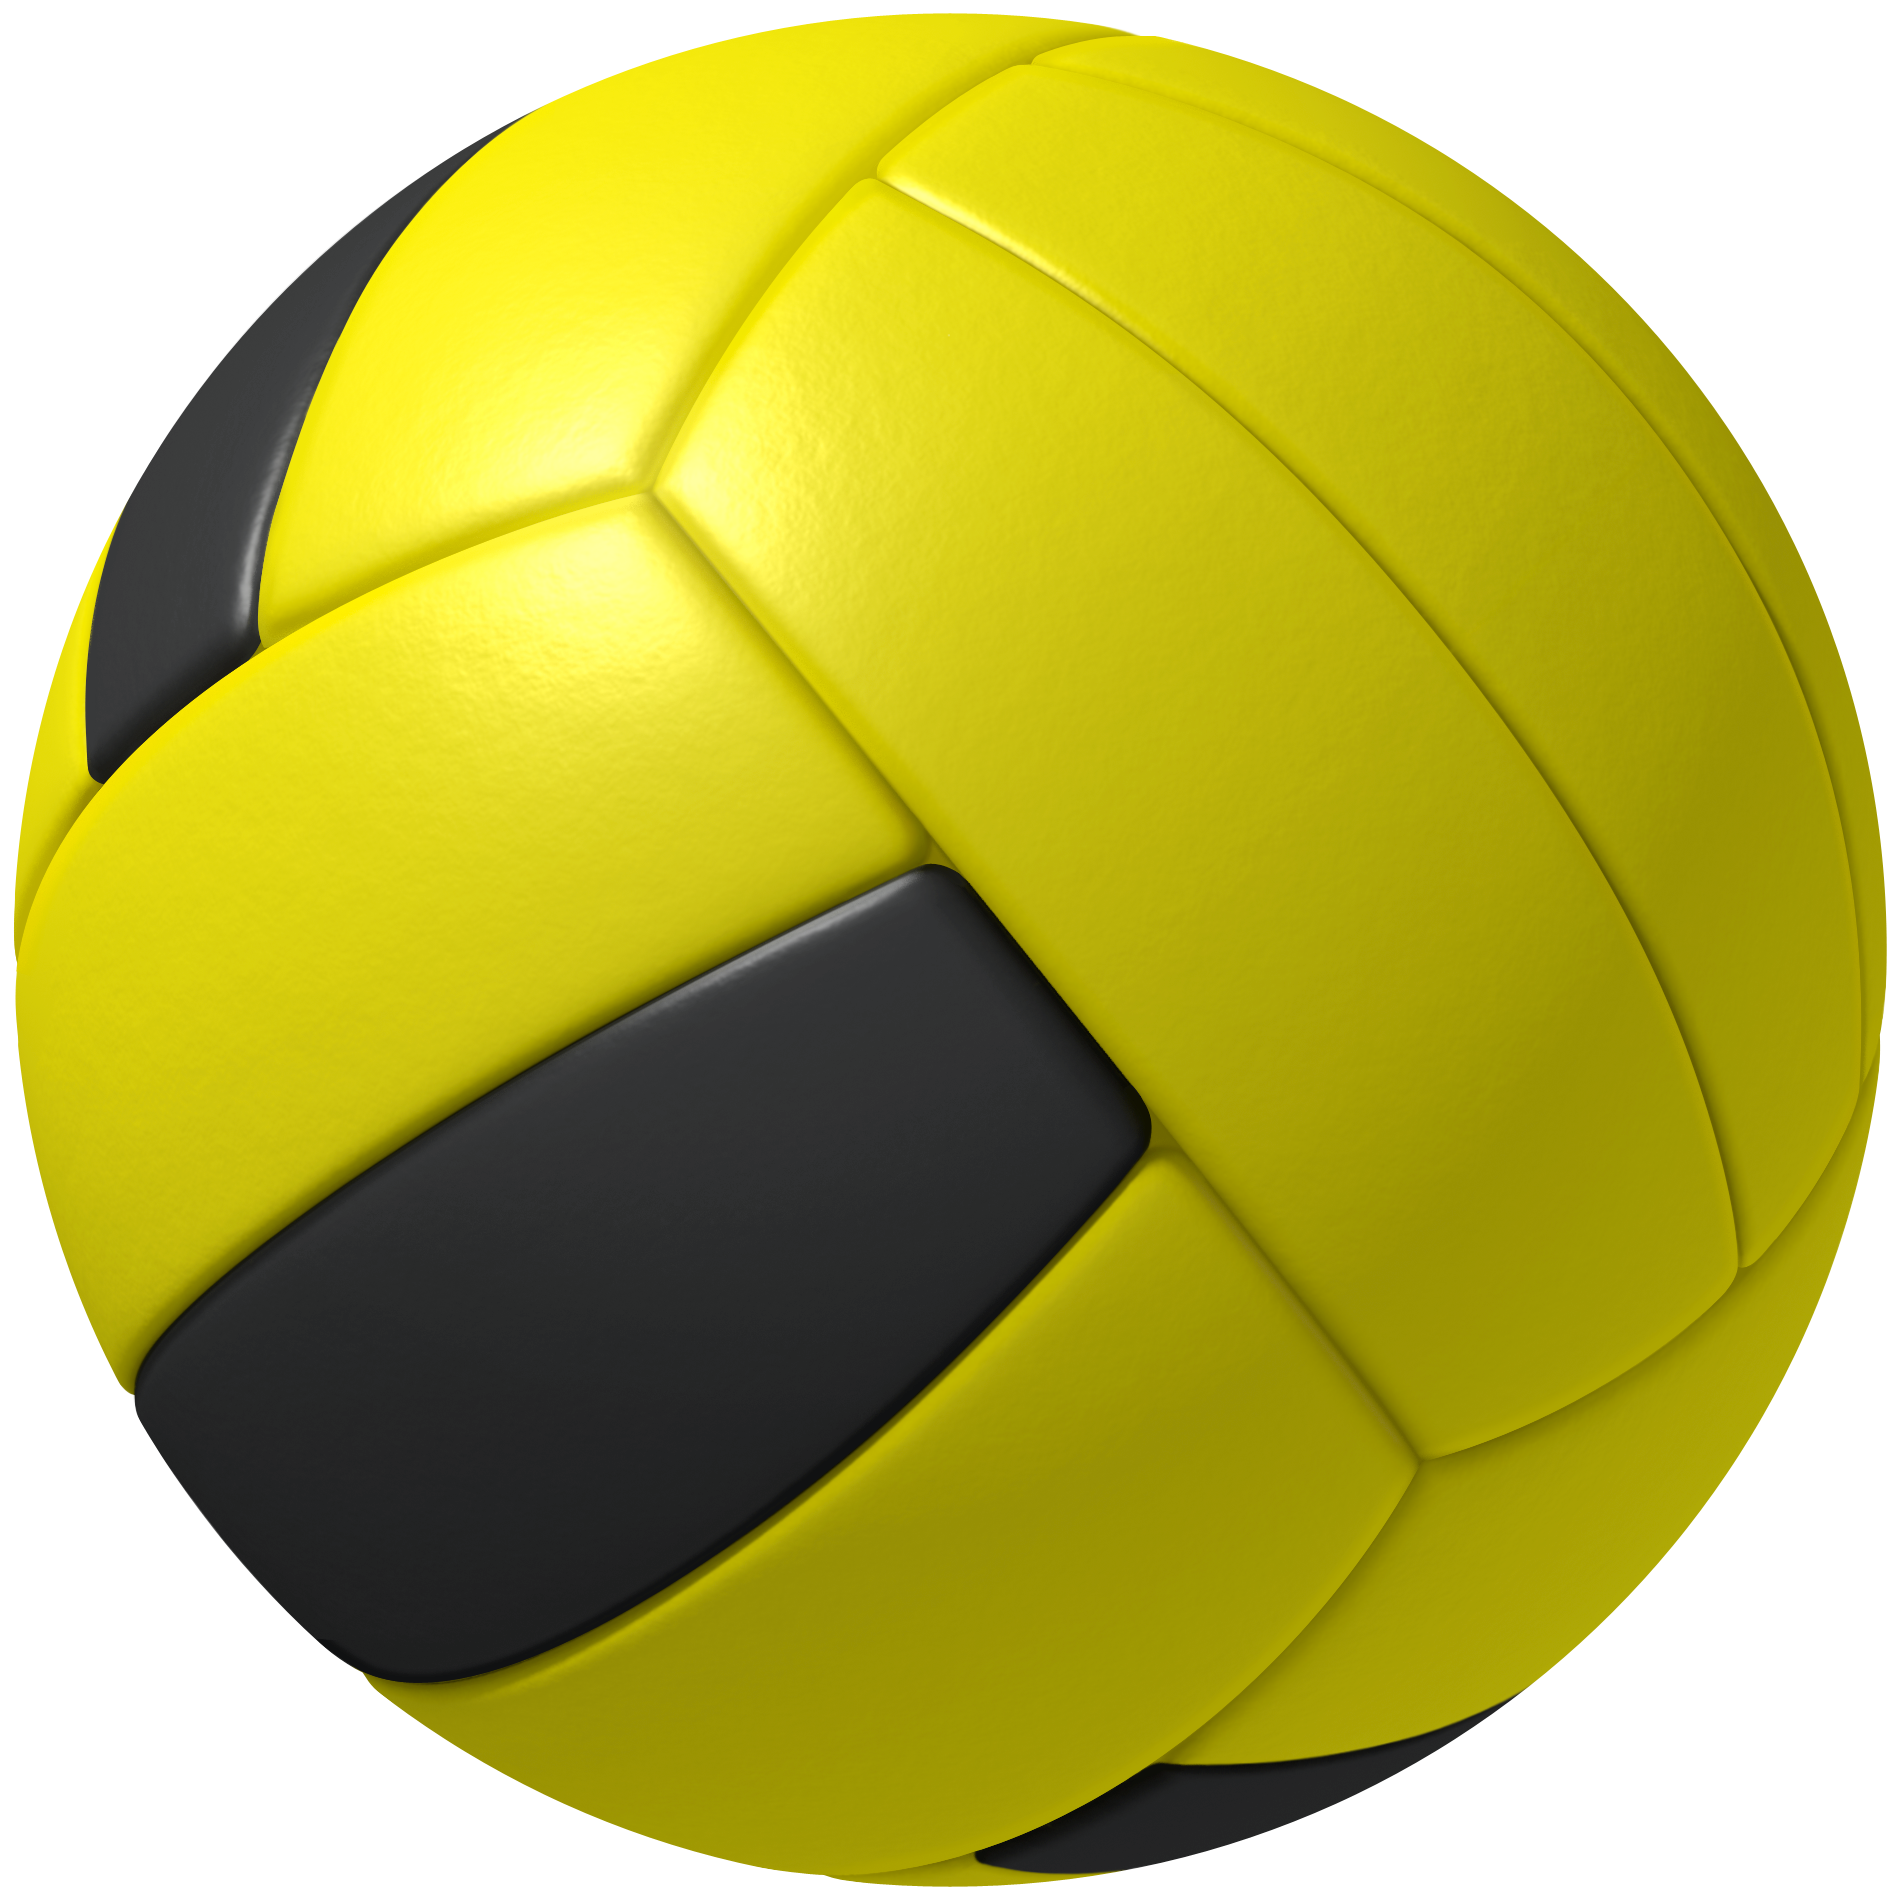 Volleyball Transparent Clipart